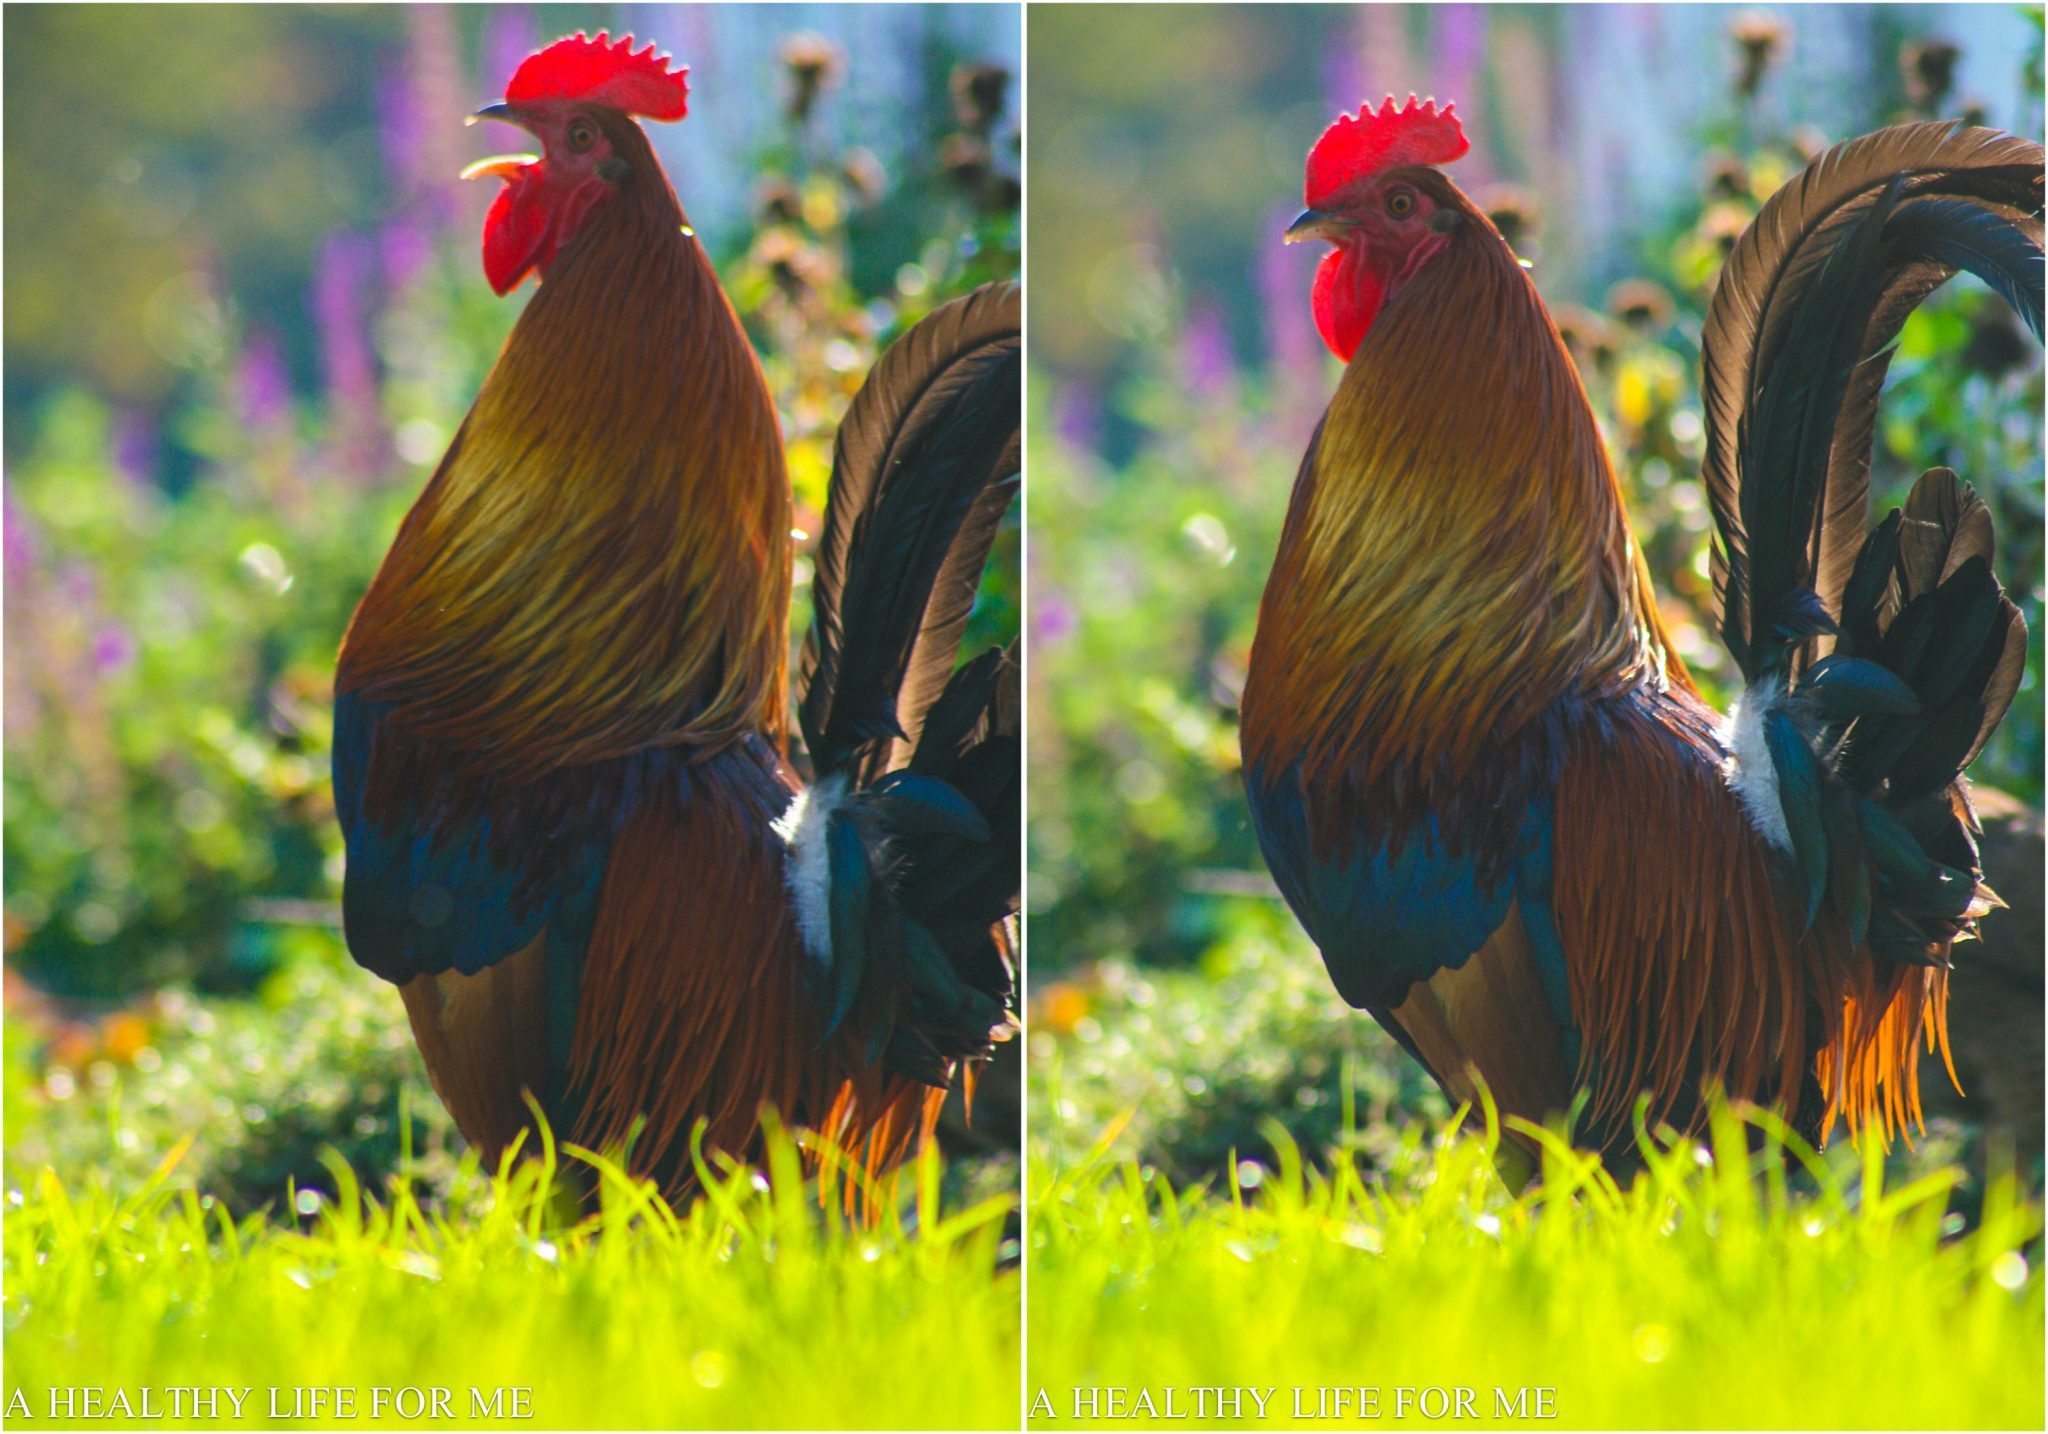 Two pictures of a rooster crowing in the grass